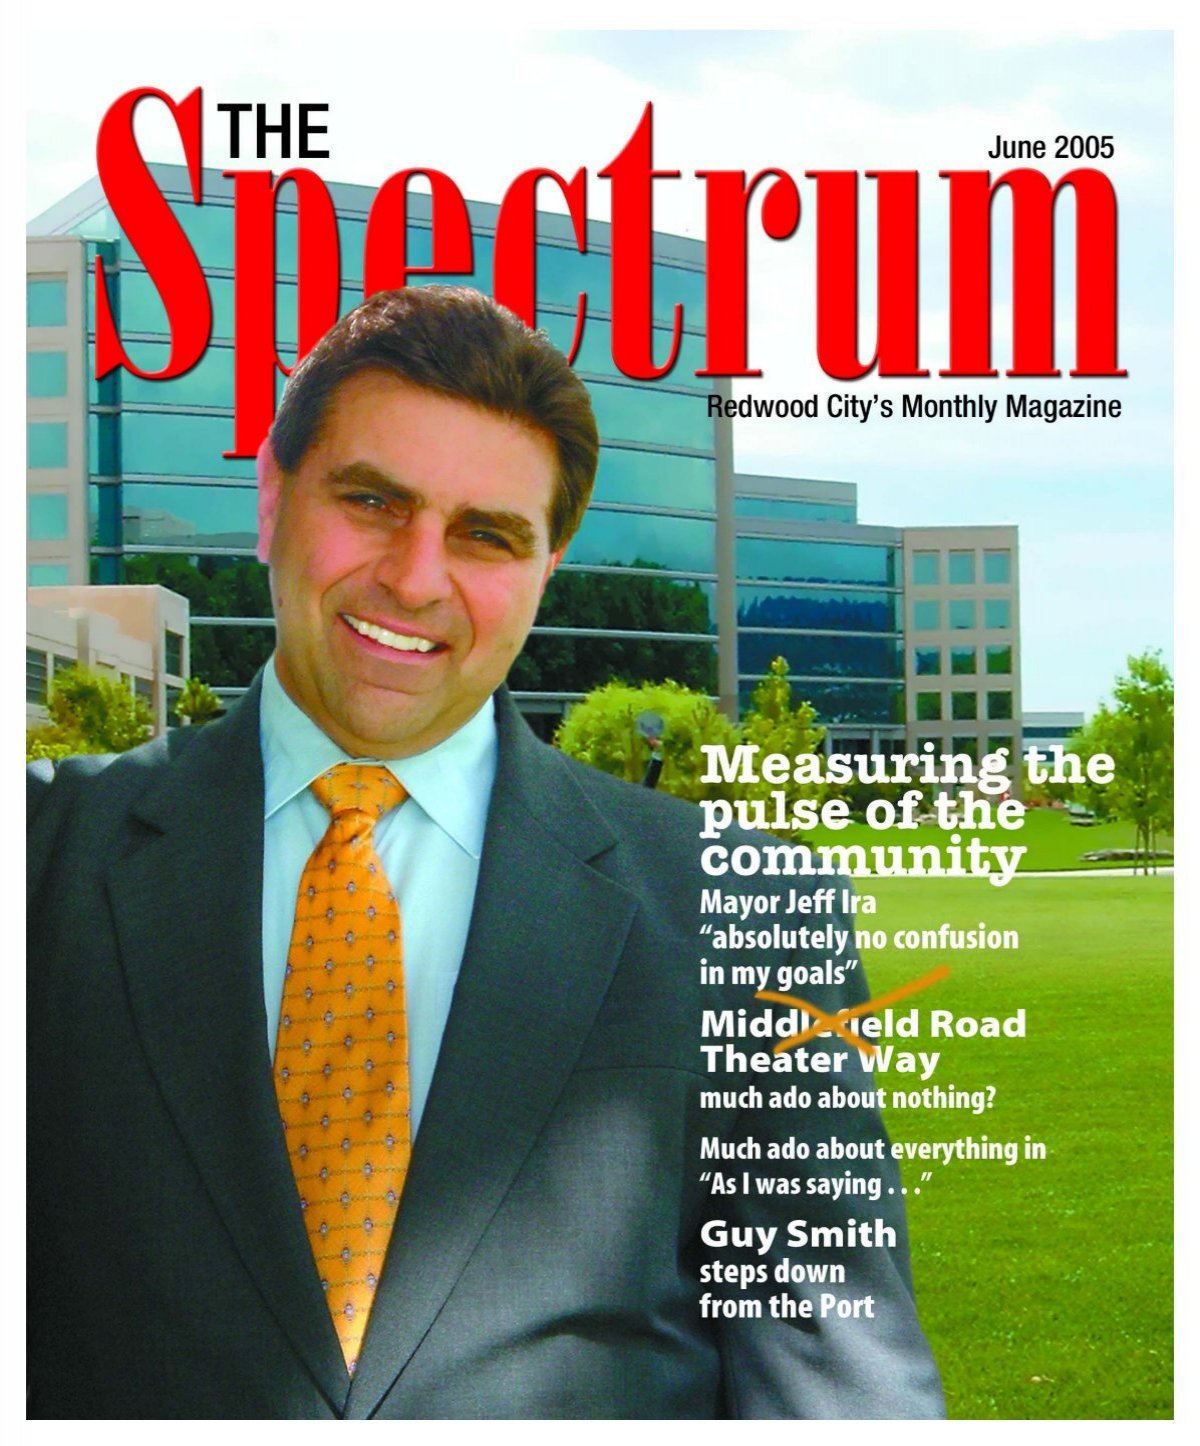 Publisher - The Spectrum Magazine - Redwood City's Monthly